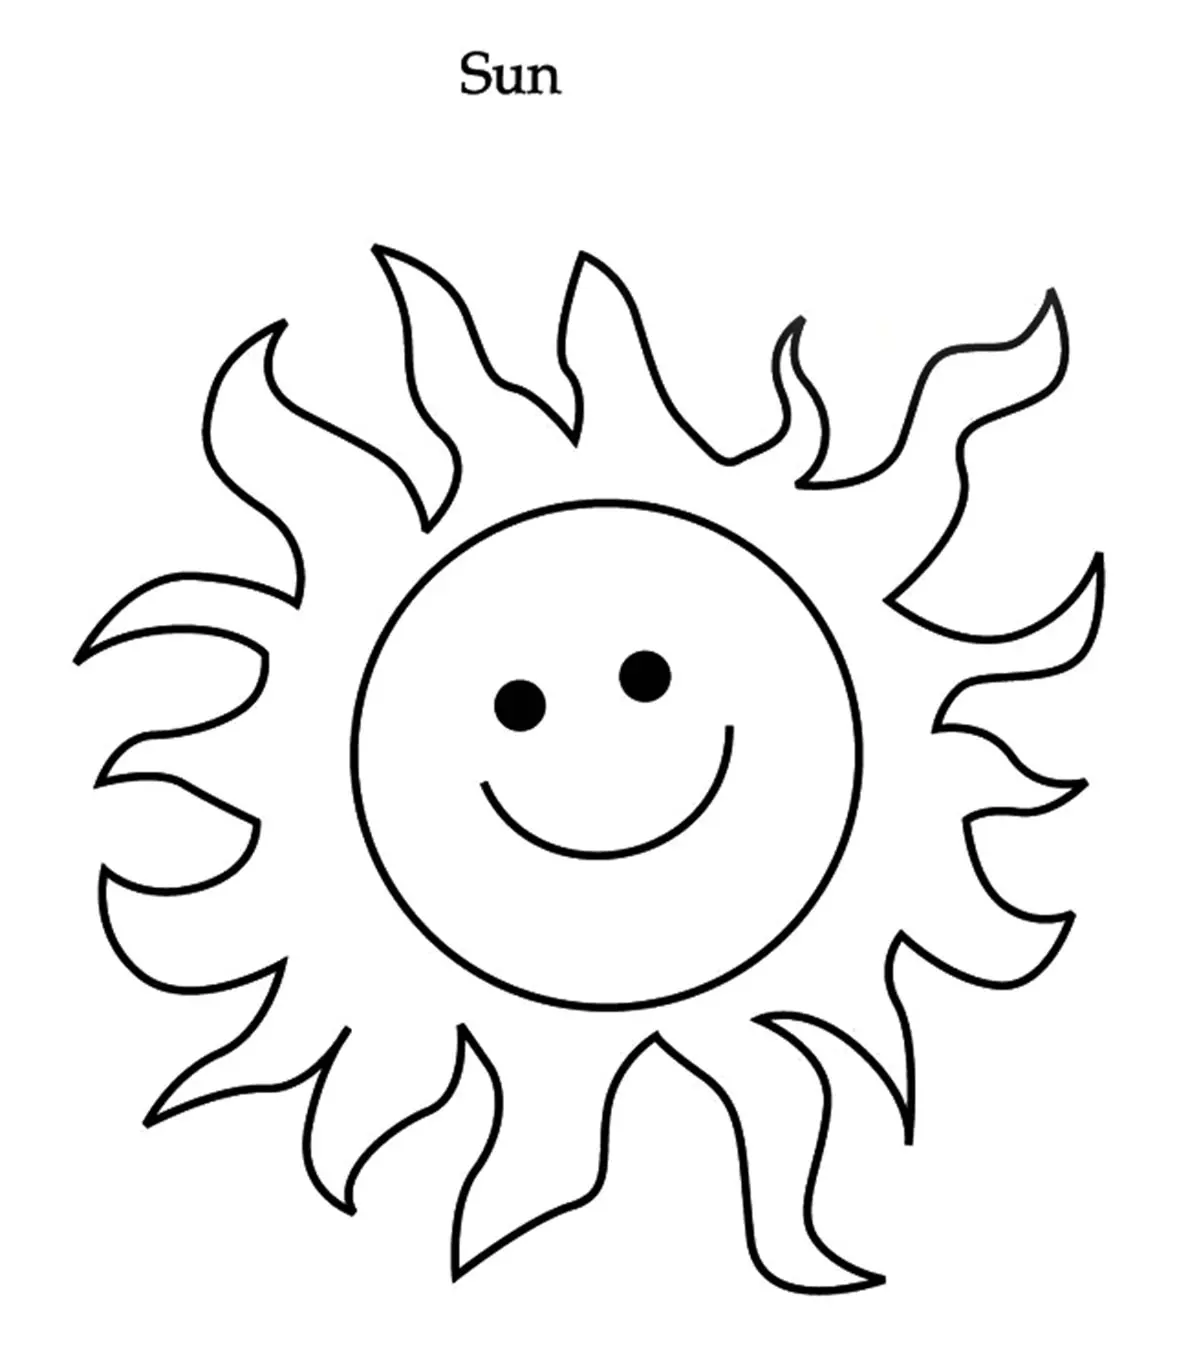 20 Solar System Coloring Pages For Your Little Ones image